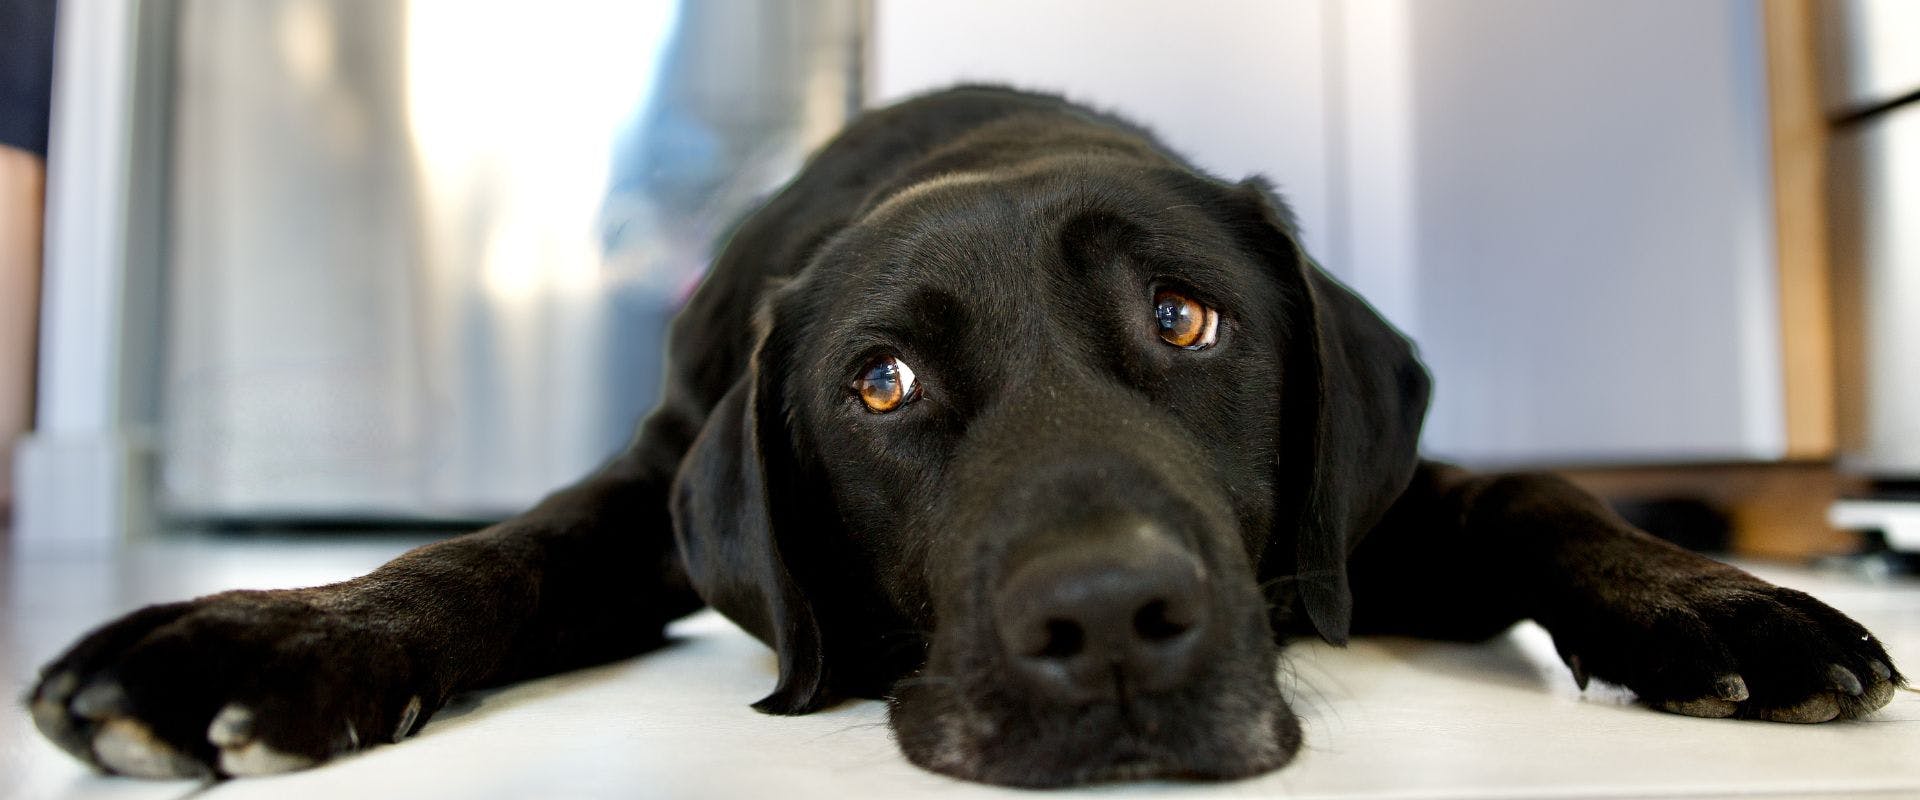 Black Labrador laying in a kitchen